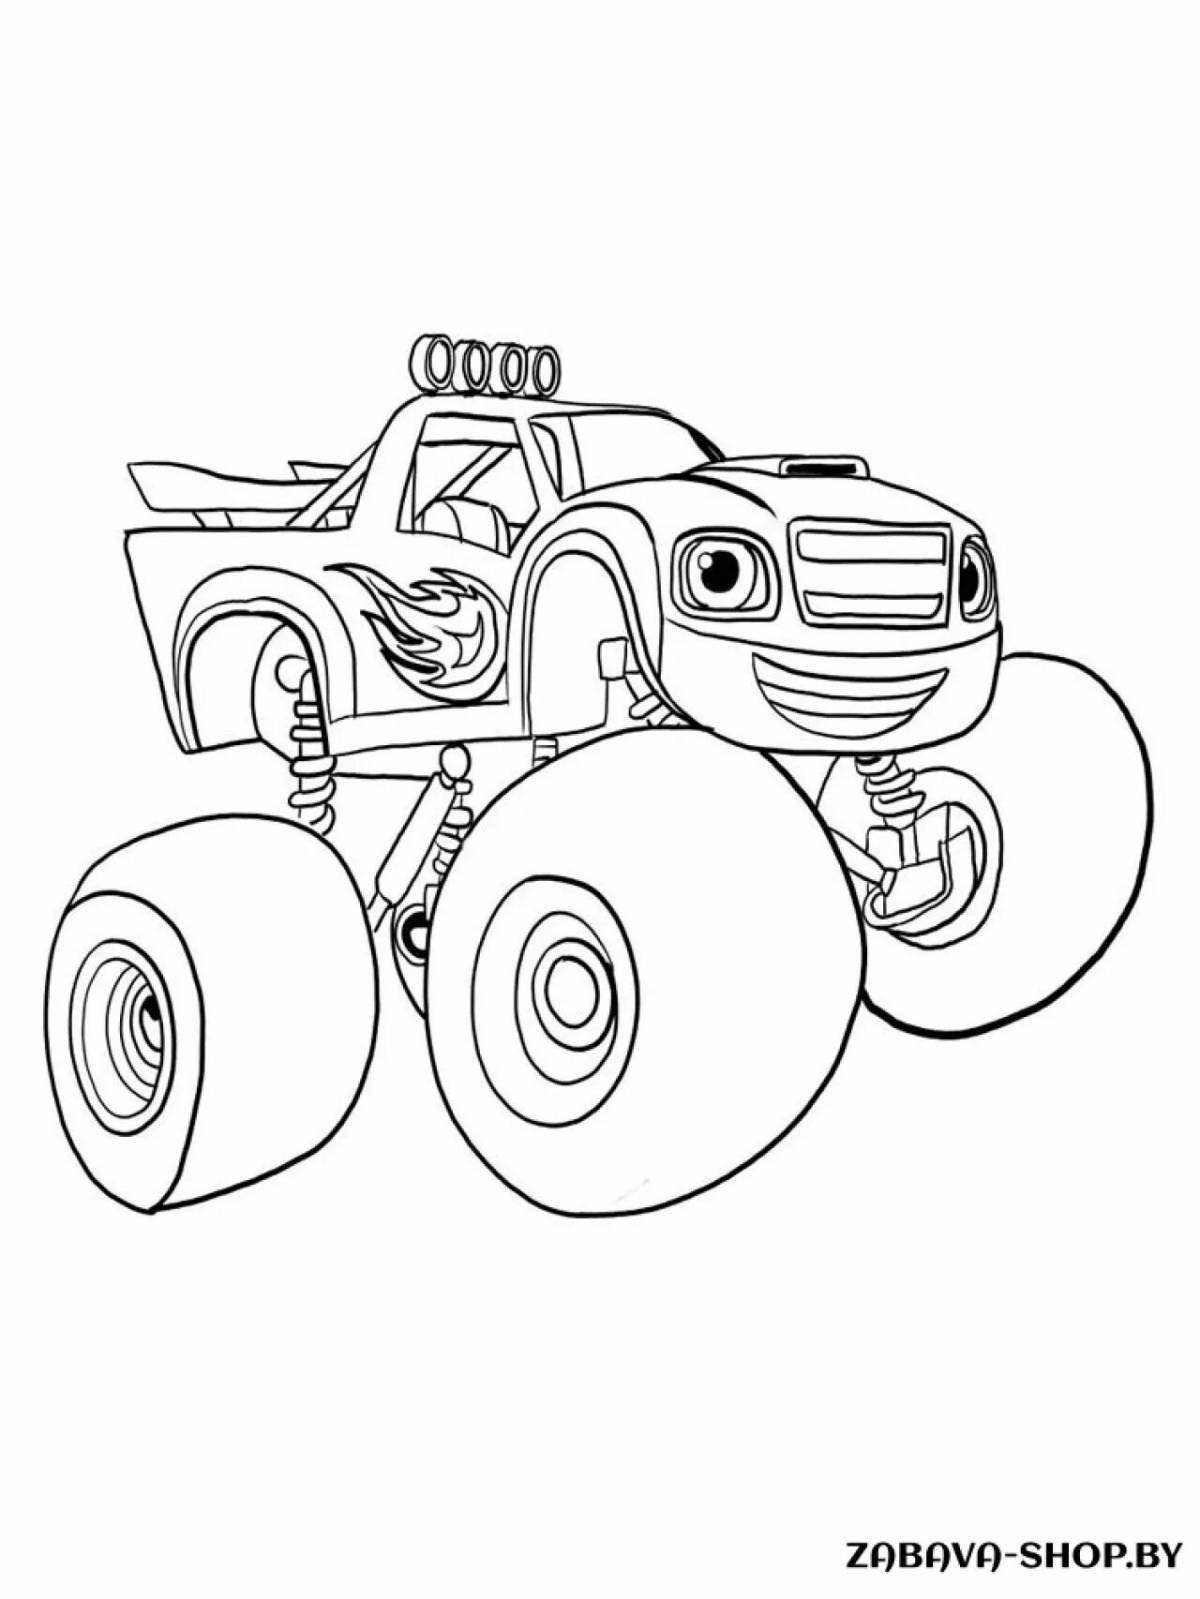 Coloring pages of the wonder car for kids